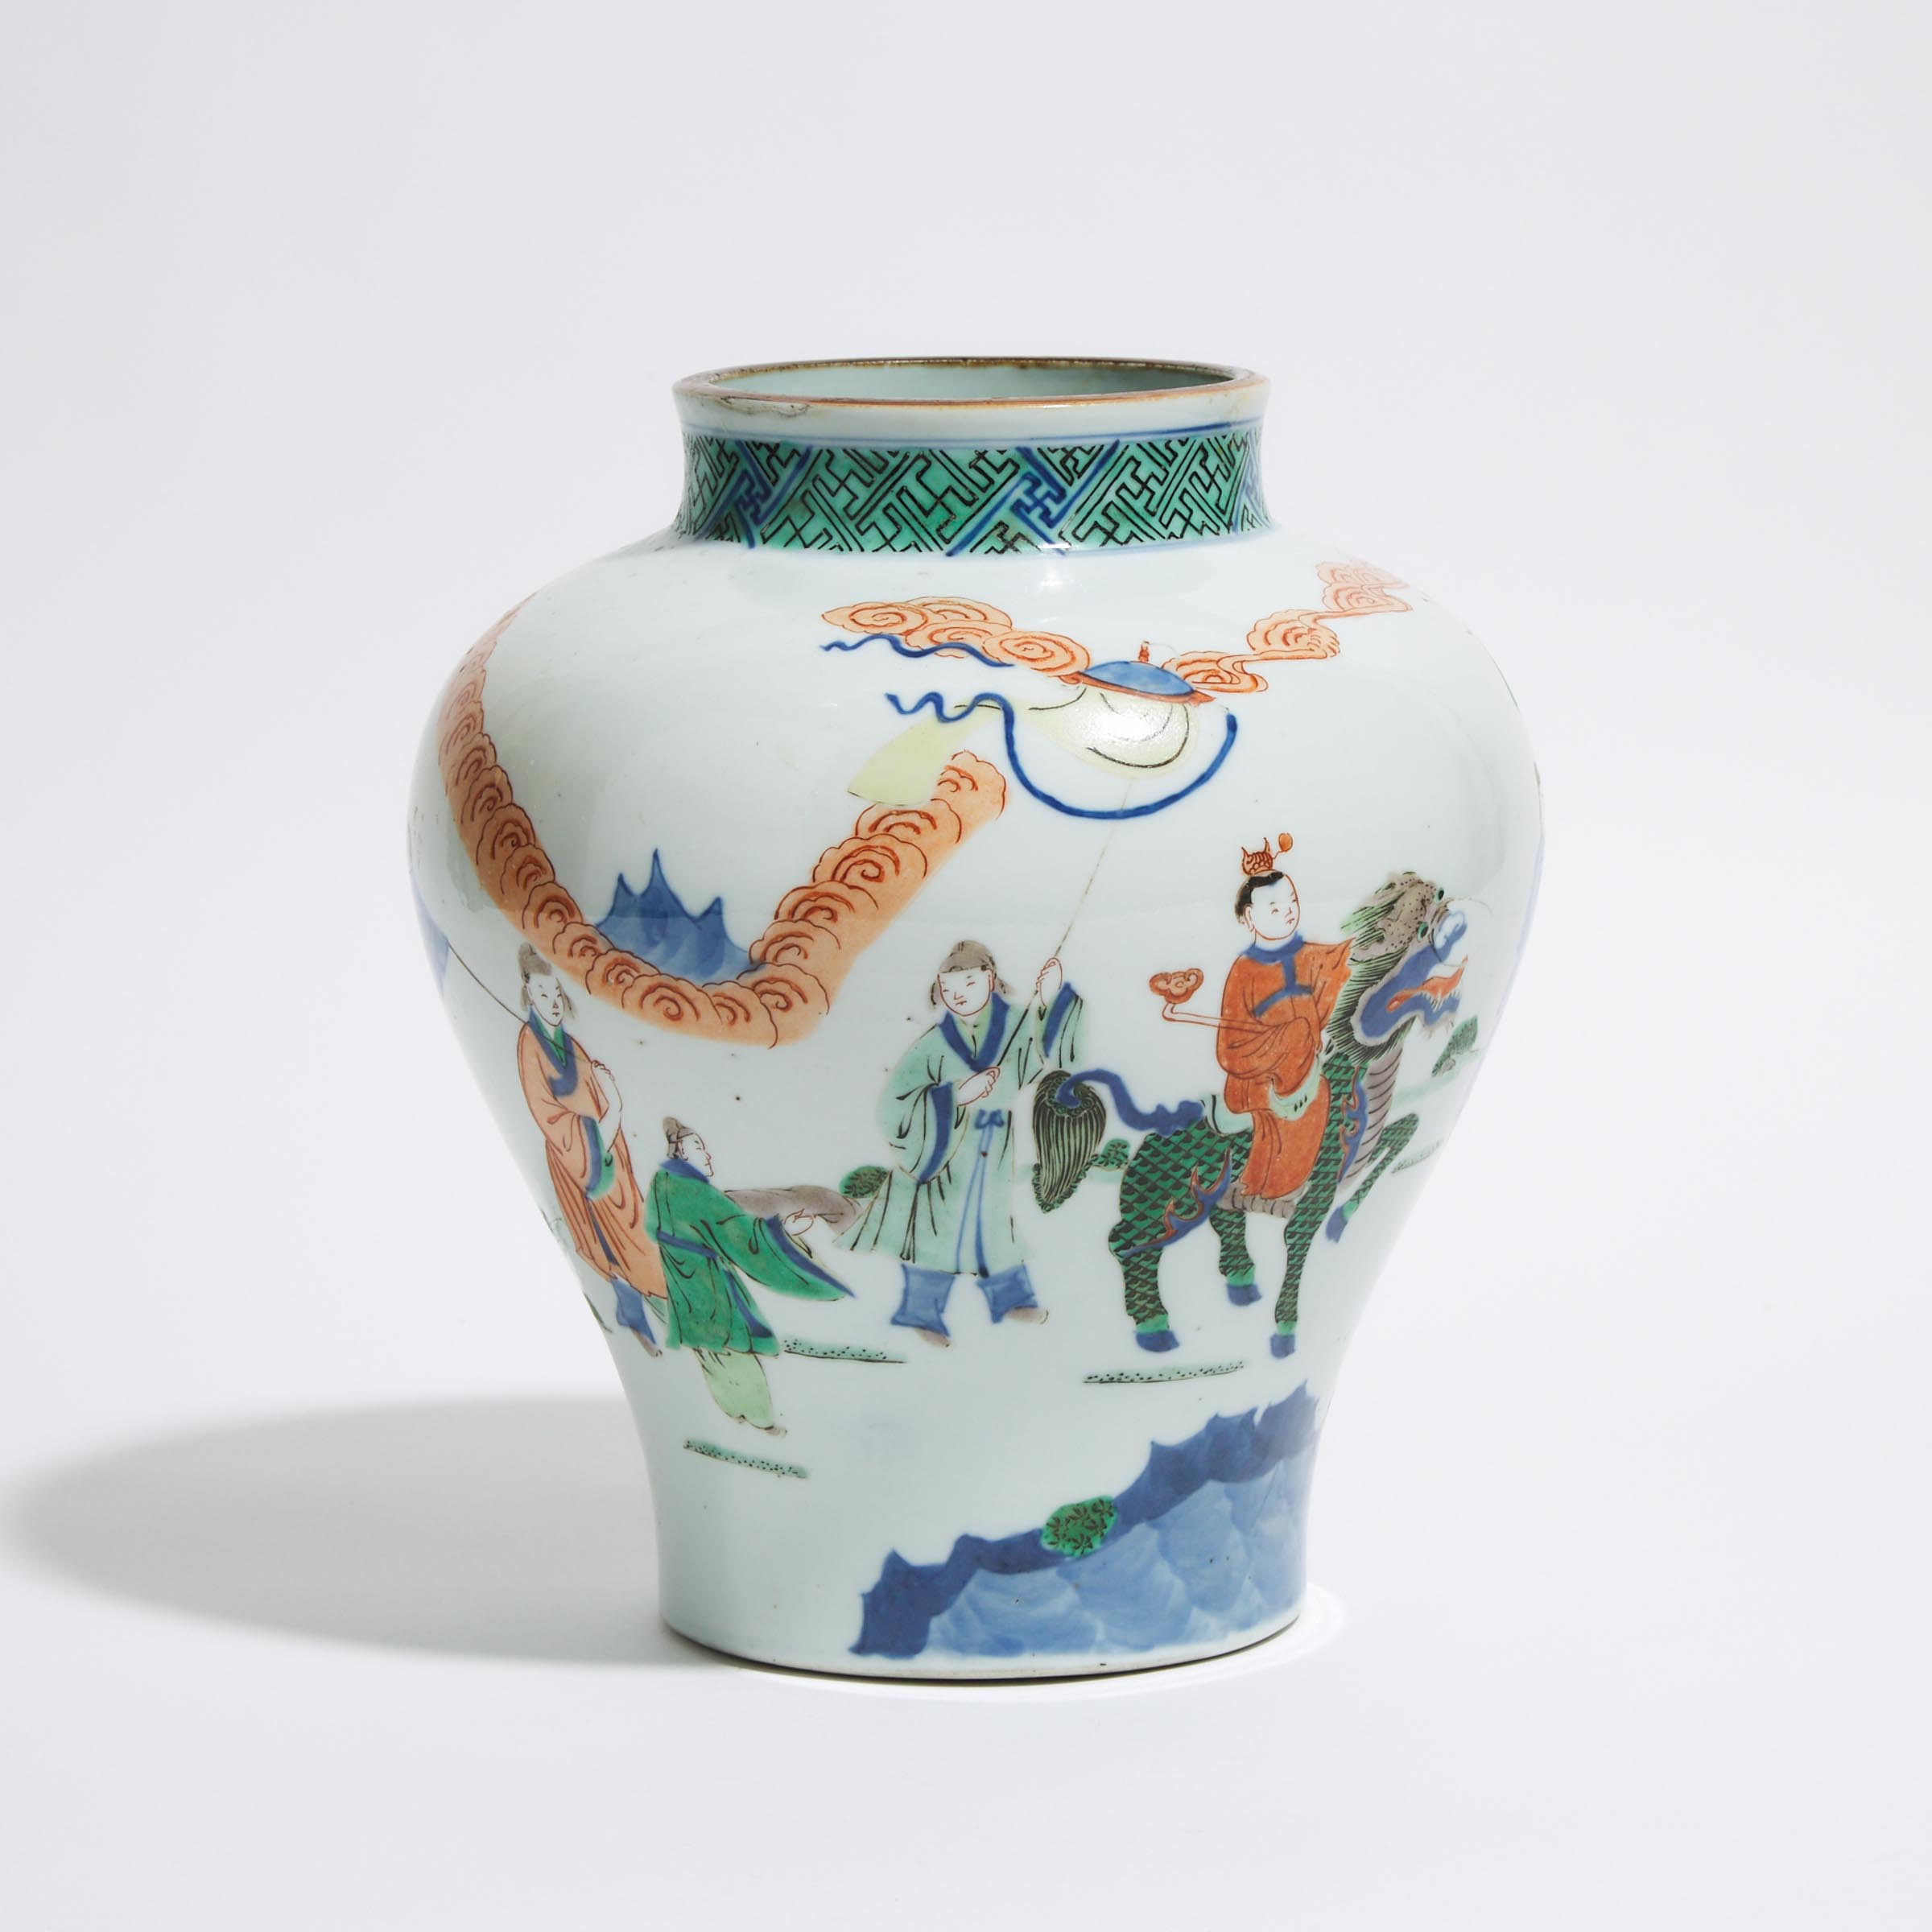 A Chinese Wucai 'Figural' Baluster Vase